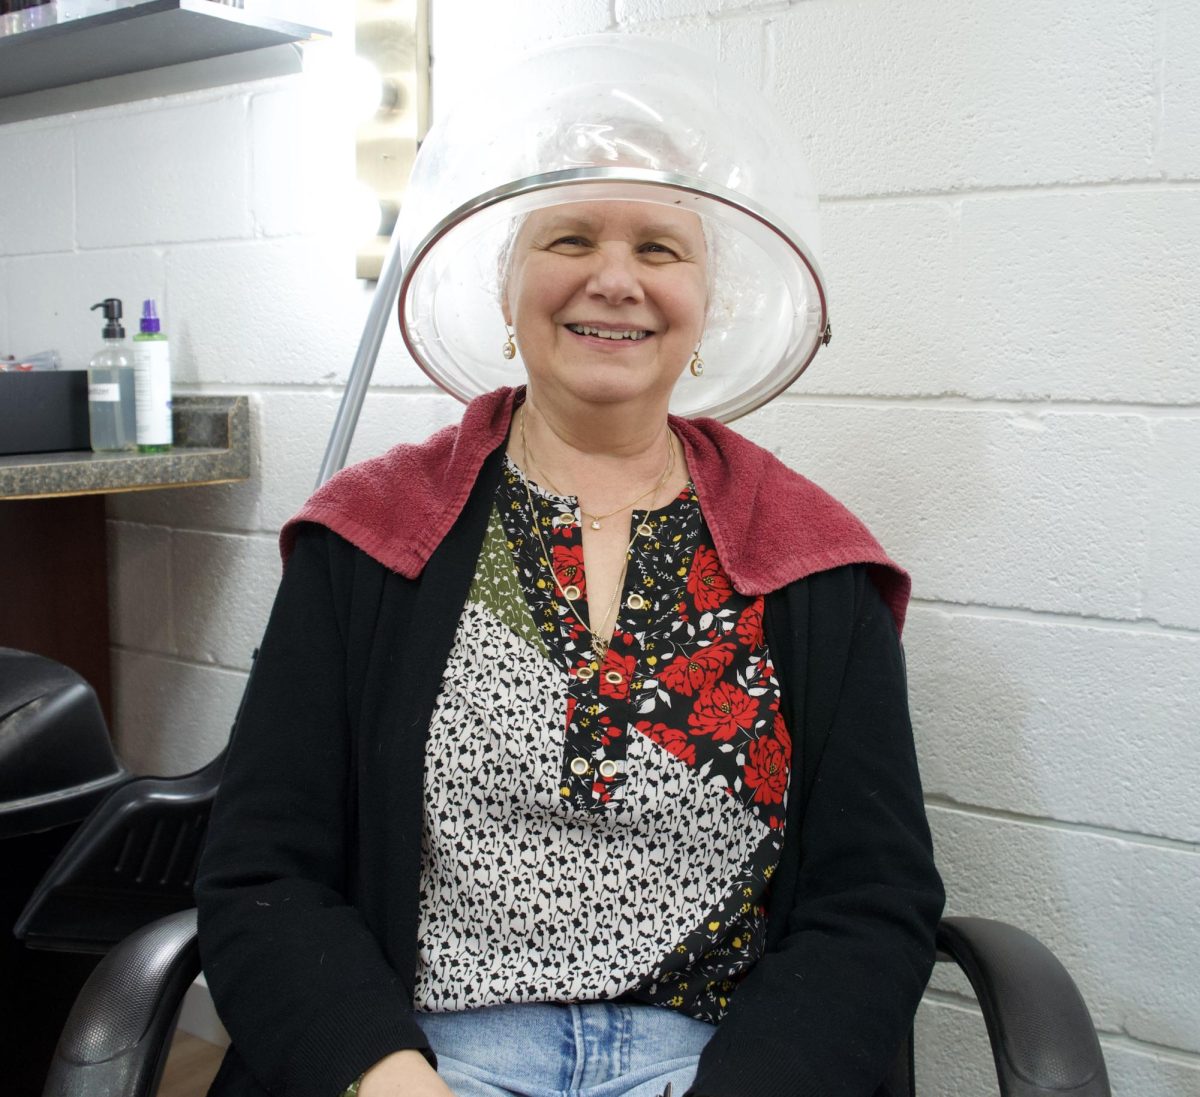 Nothing but smiles from Amy Lange as she under the dryer at A Cut Above Hair and Nail Salon on March 22, 2024.